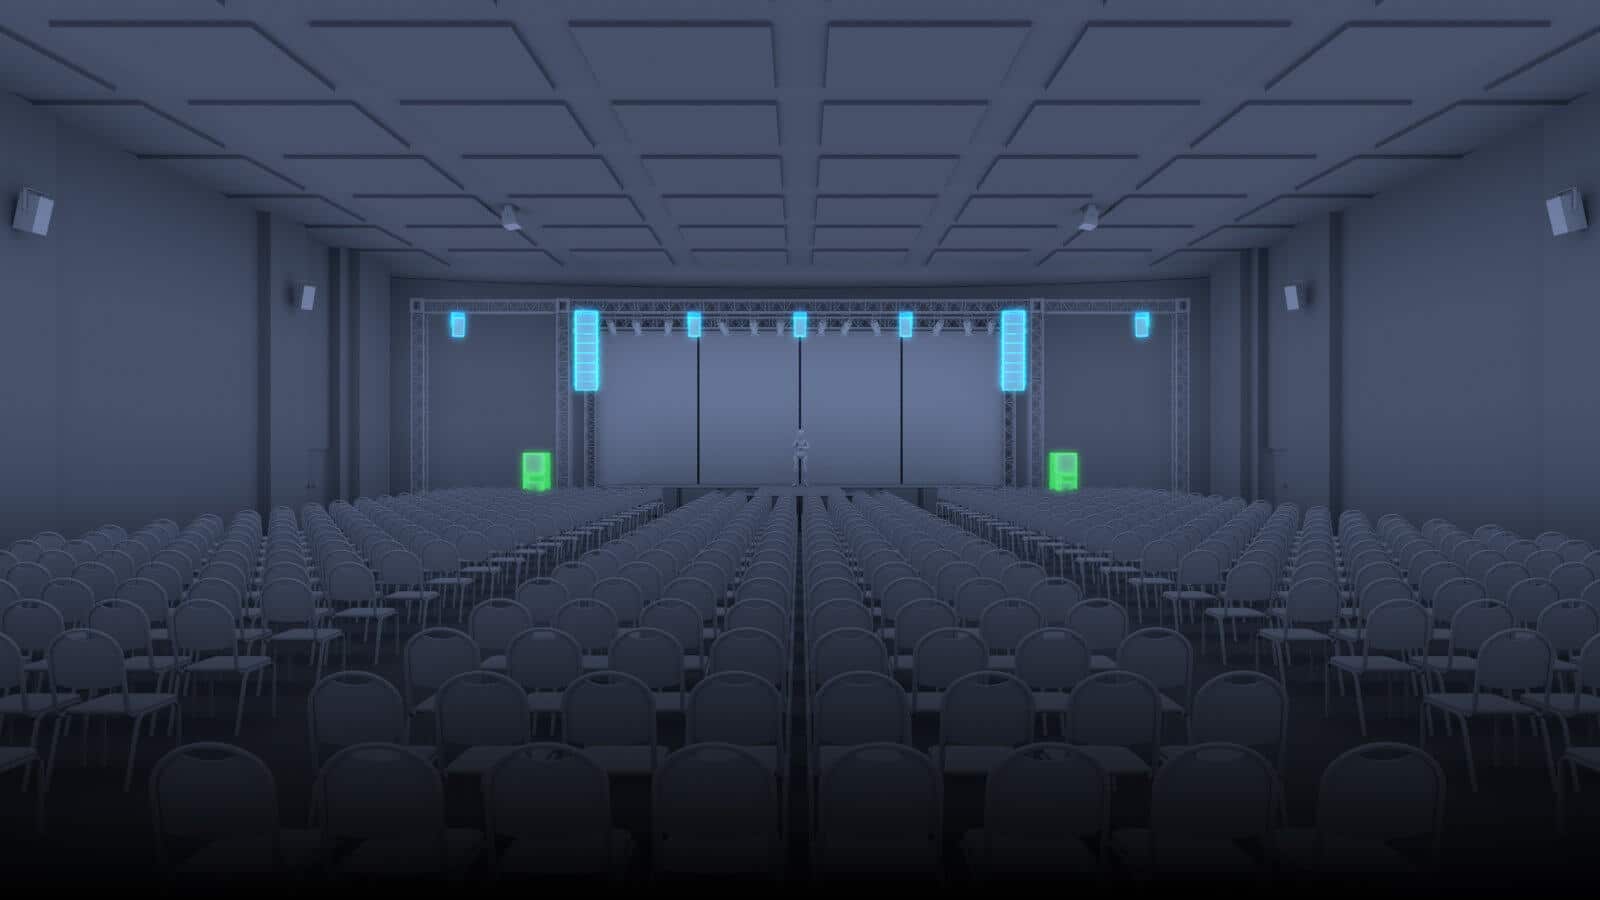 An auditorium with a frontal set up